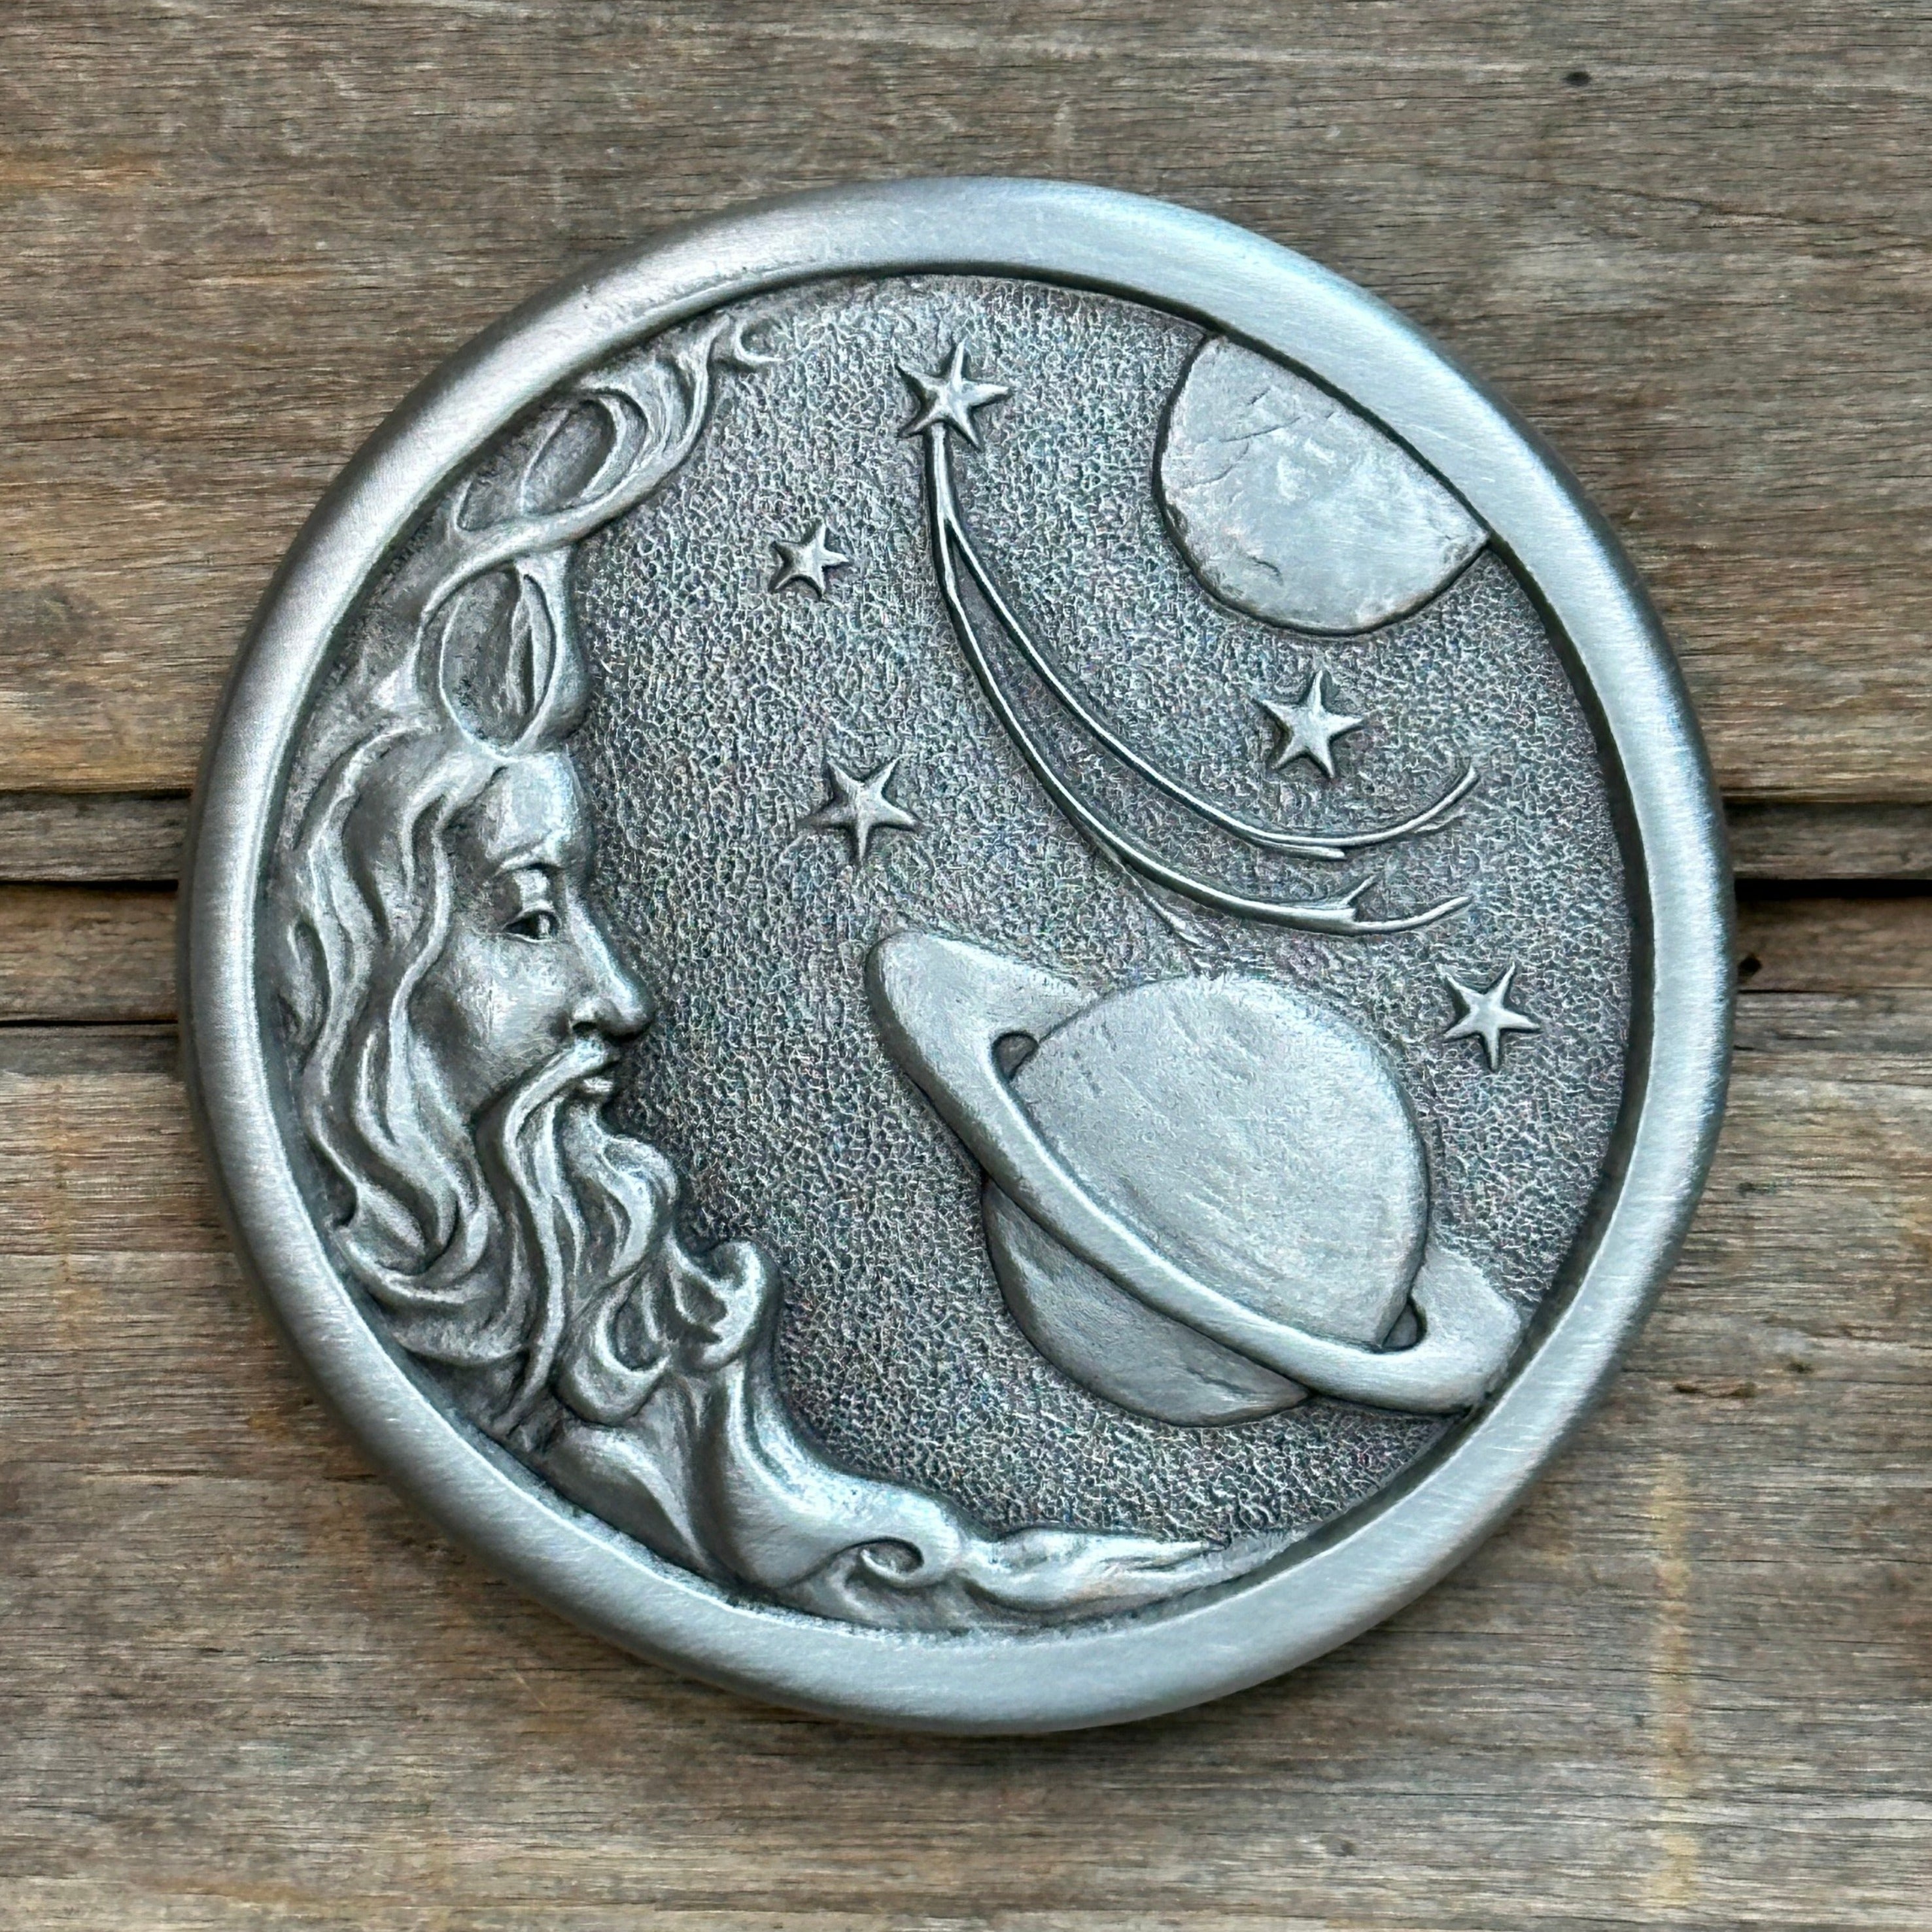 This is a pewter belt buckle with a sliver tone.  It depicts a man in the moon in a space scene with saturn, planet, and stars.